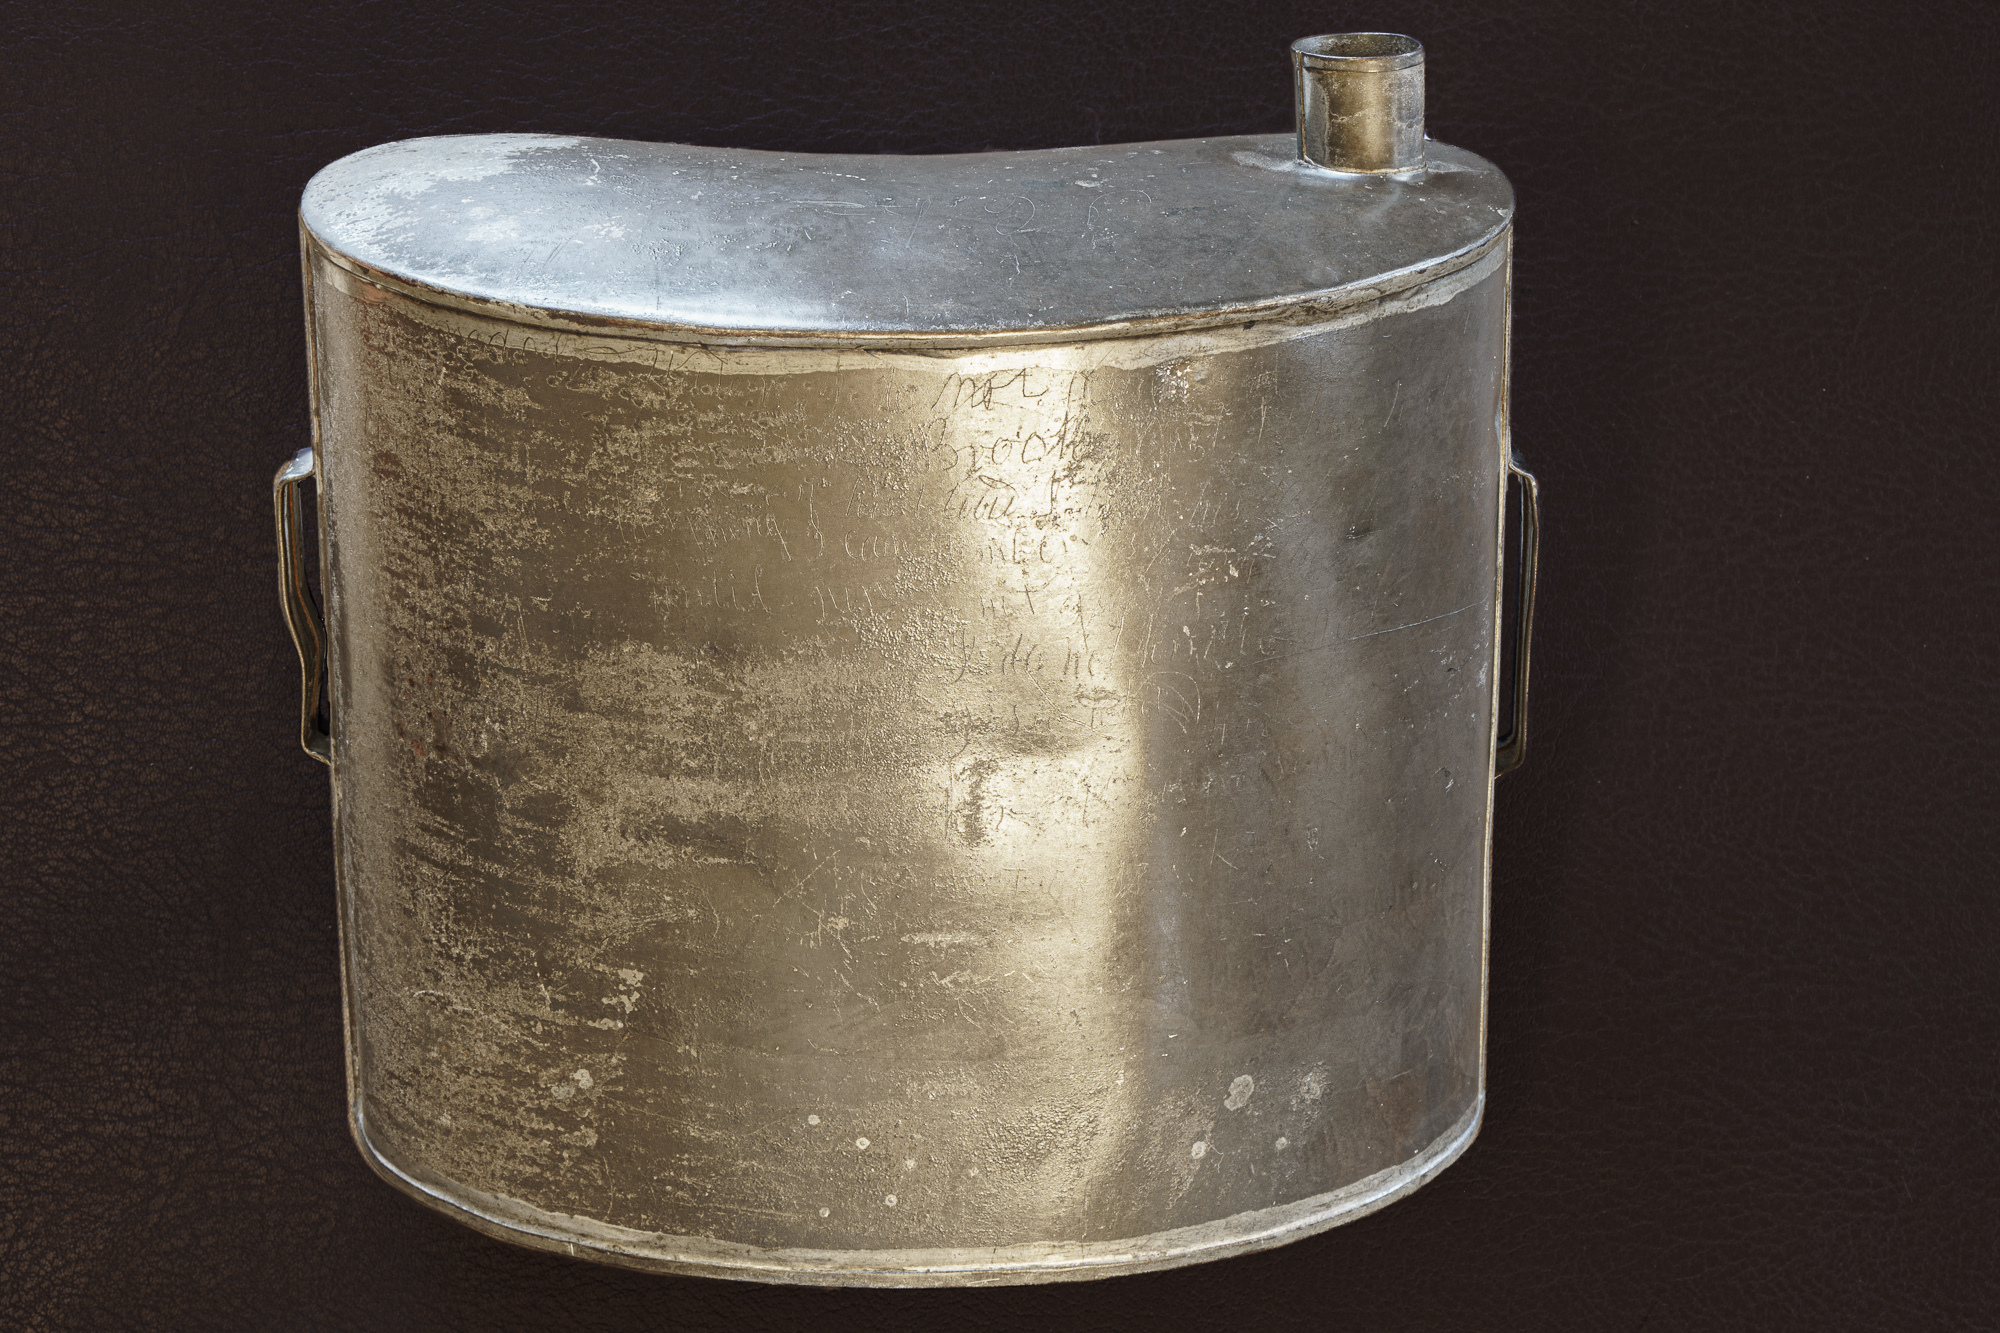 Coultard's water canteen with engraving